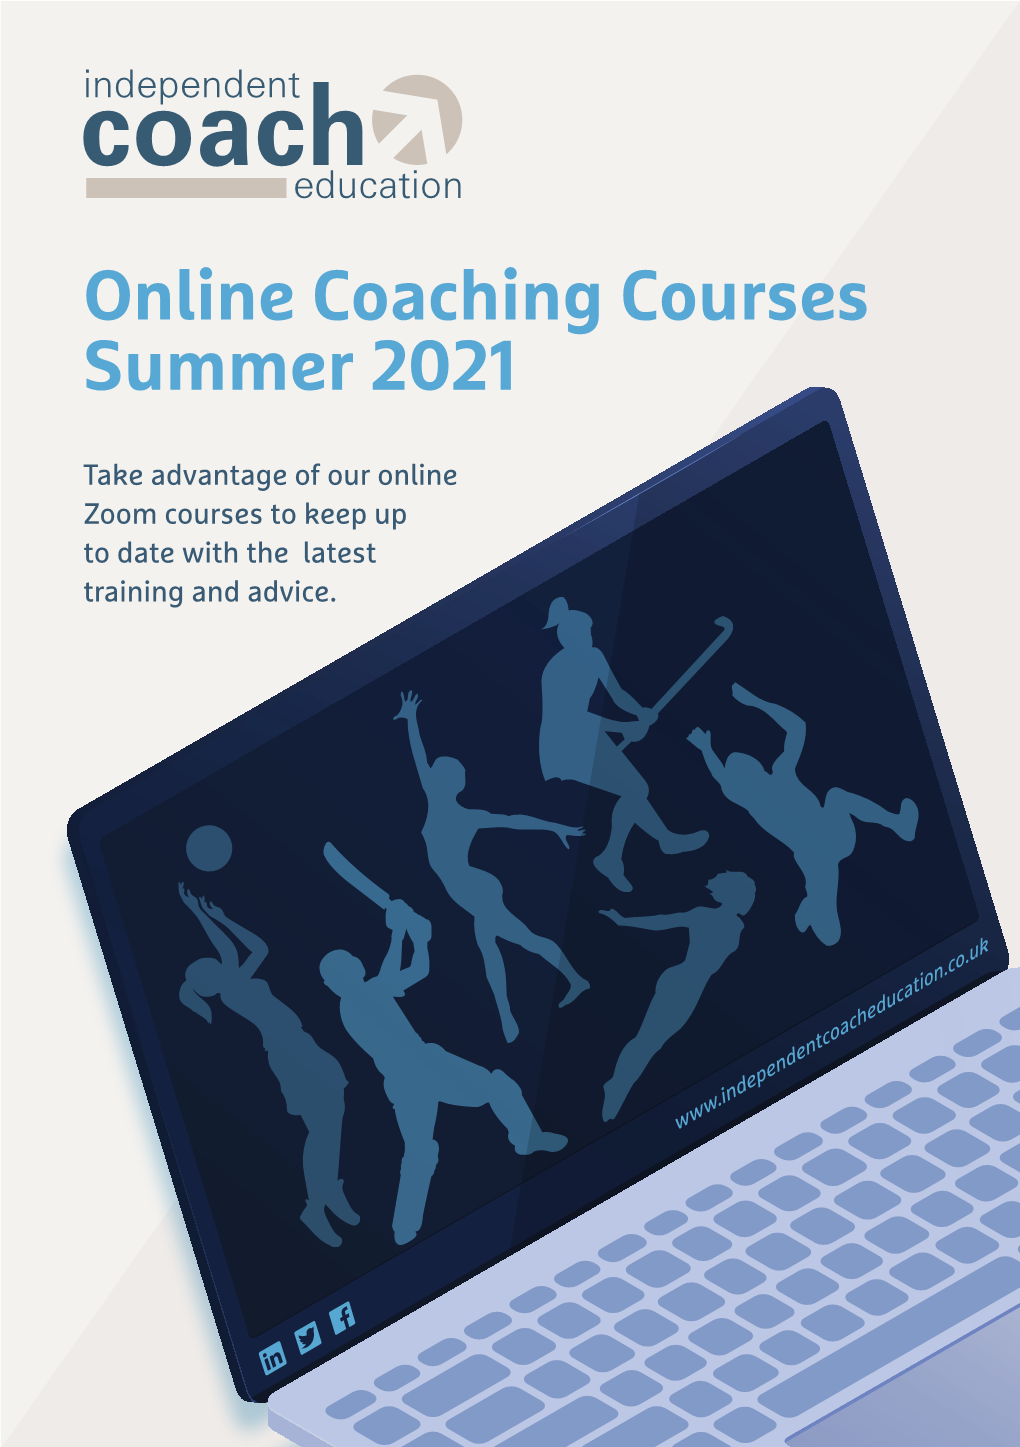 Online Coaching Courses Summer 2021